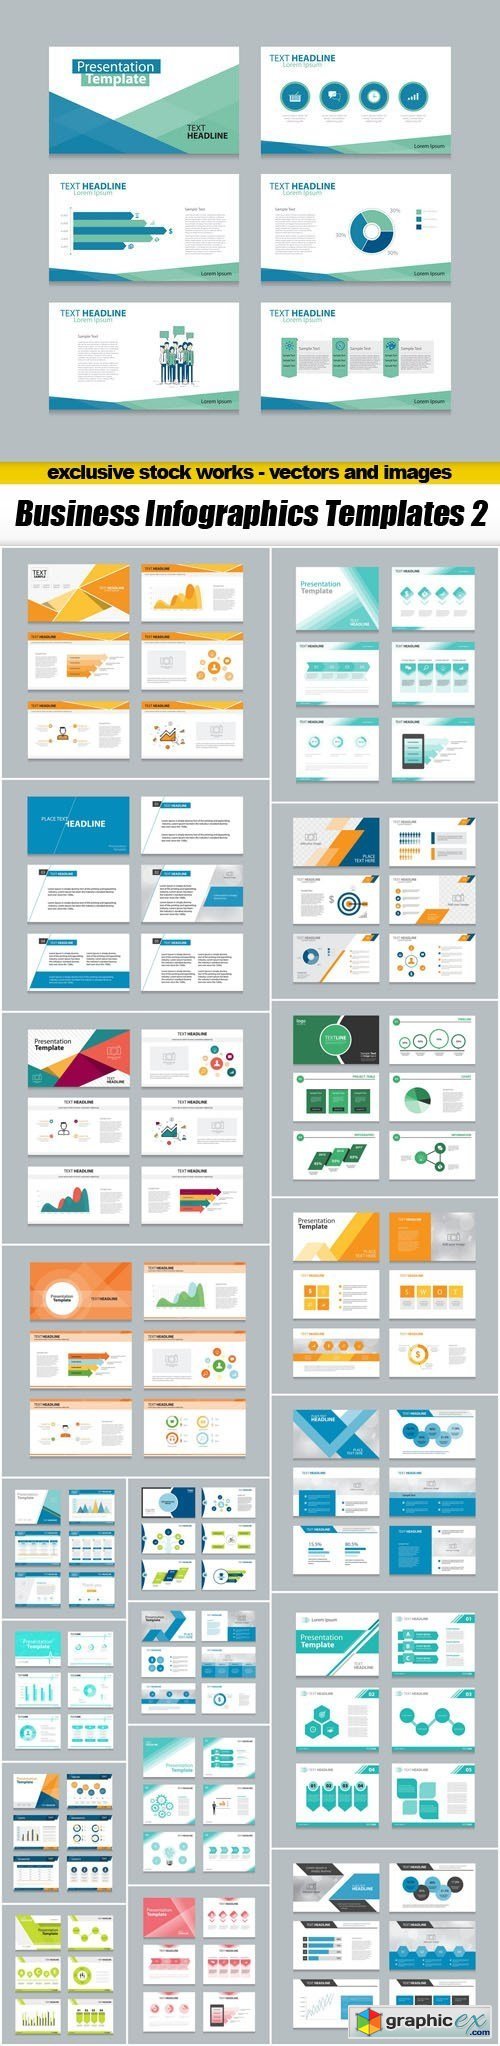 Business Infographics Templates 2 - 20xEPS